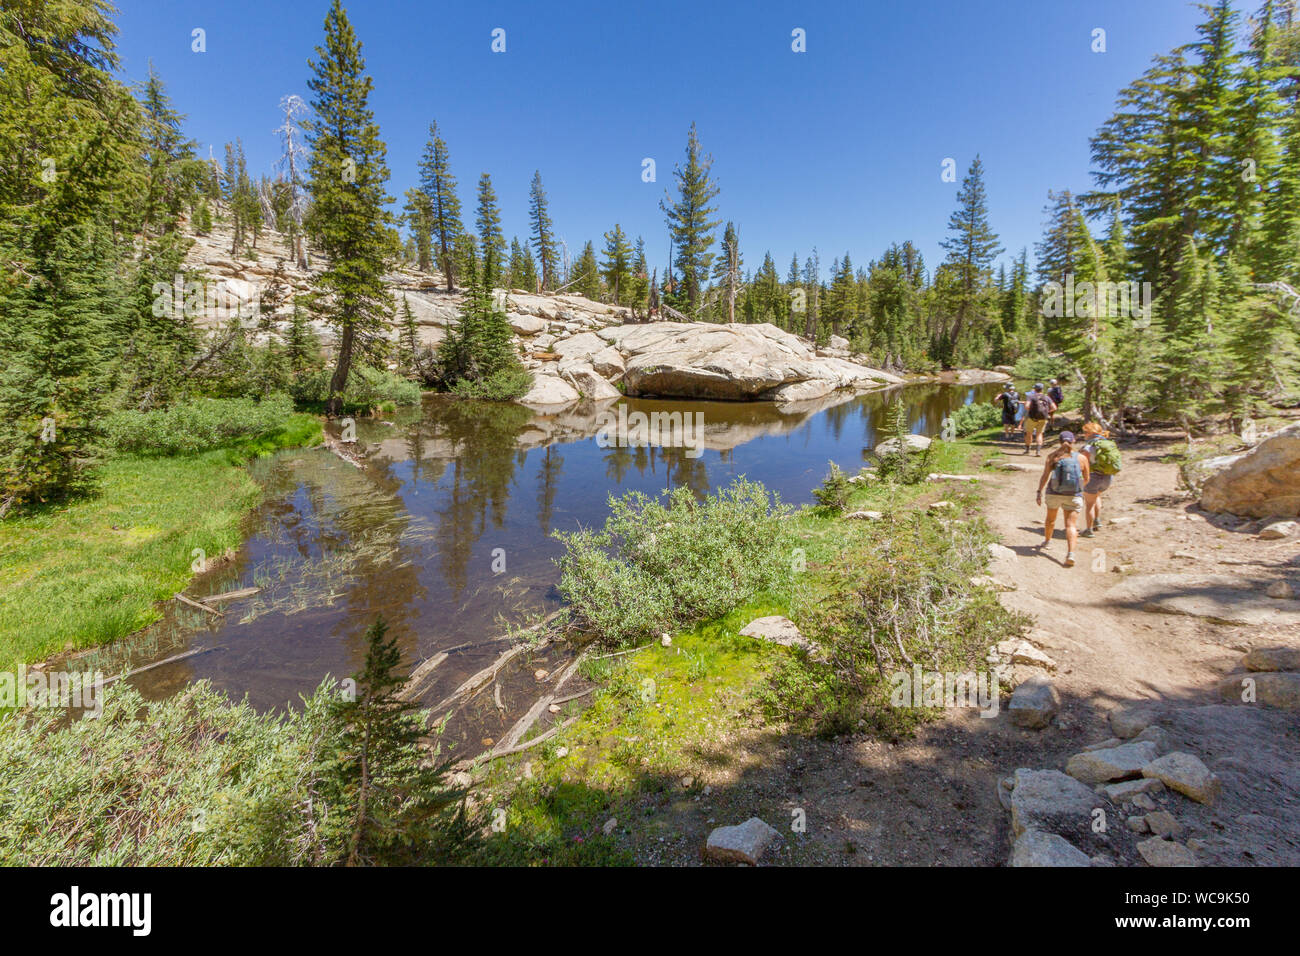 People hiking next to a pond in the Sierra Nevada mountains, California, USA. The pond is clear, reflecting green trees and blue sky. Copy space. Stock Photo